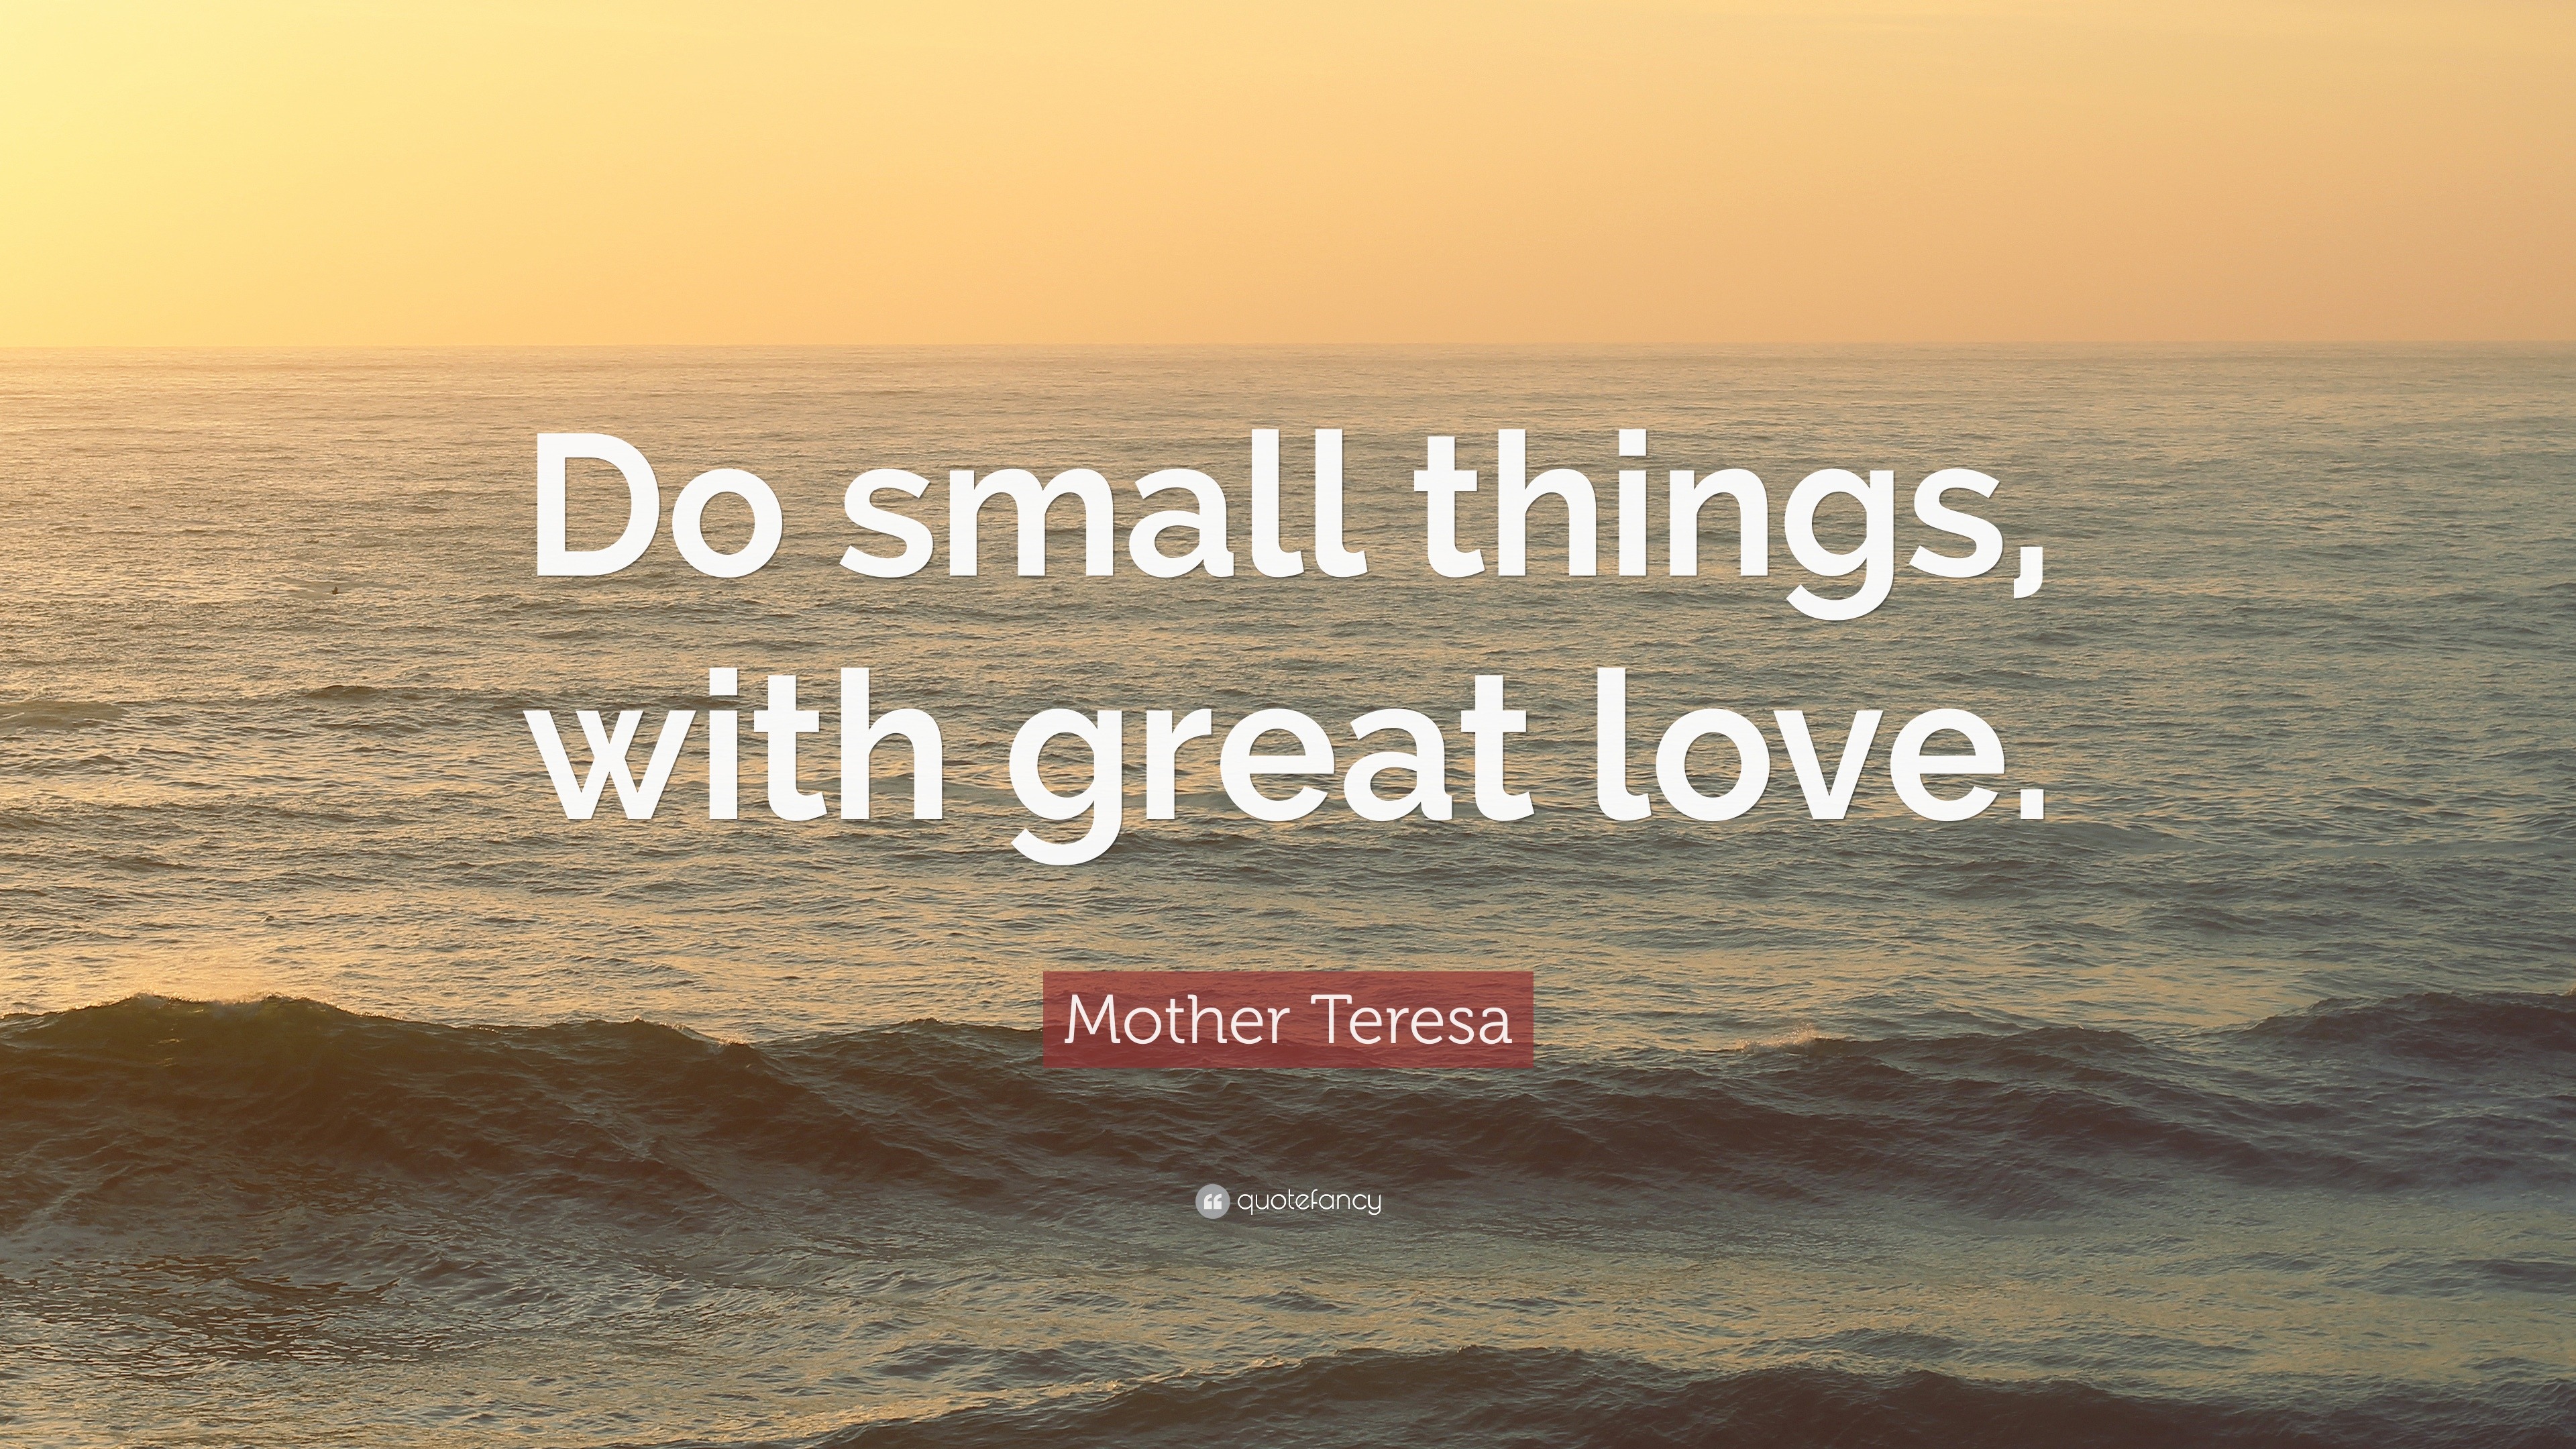 Mother Teresa Quote “Do small things with great love ”